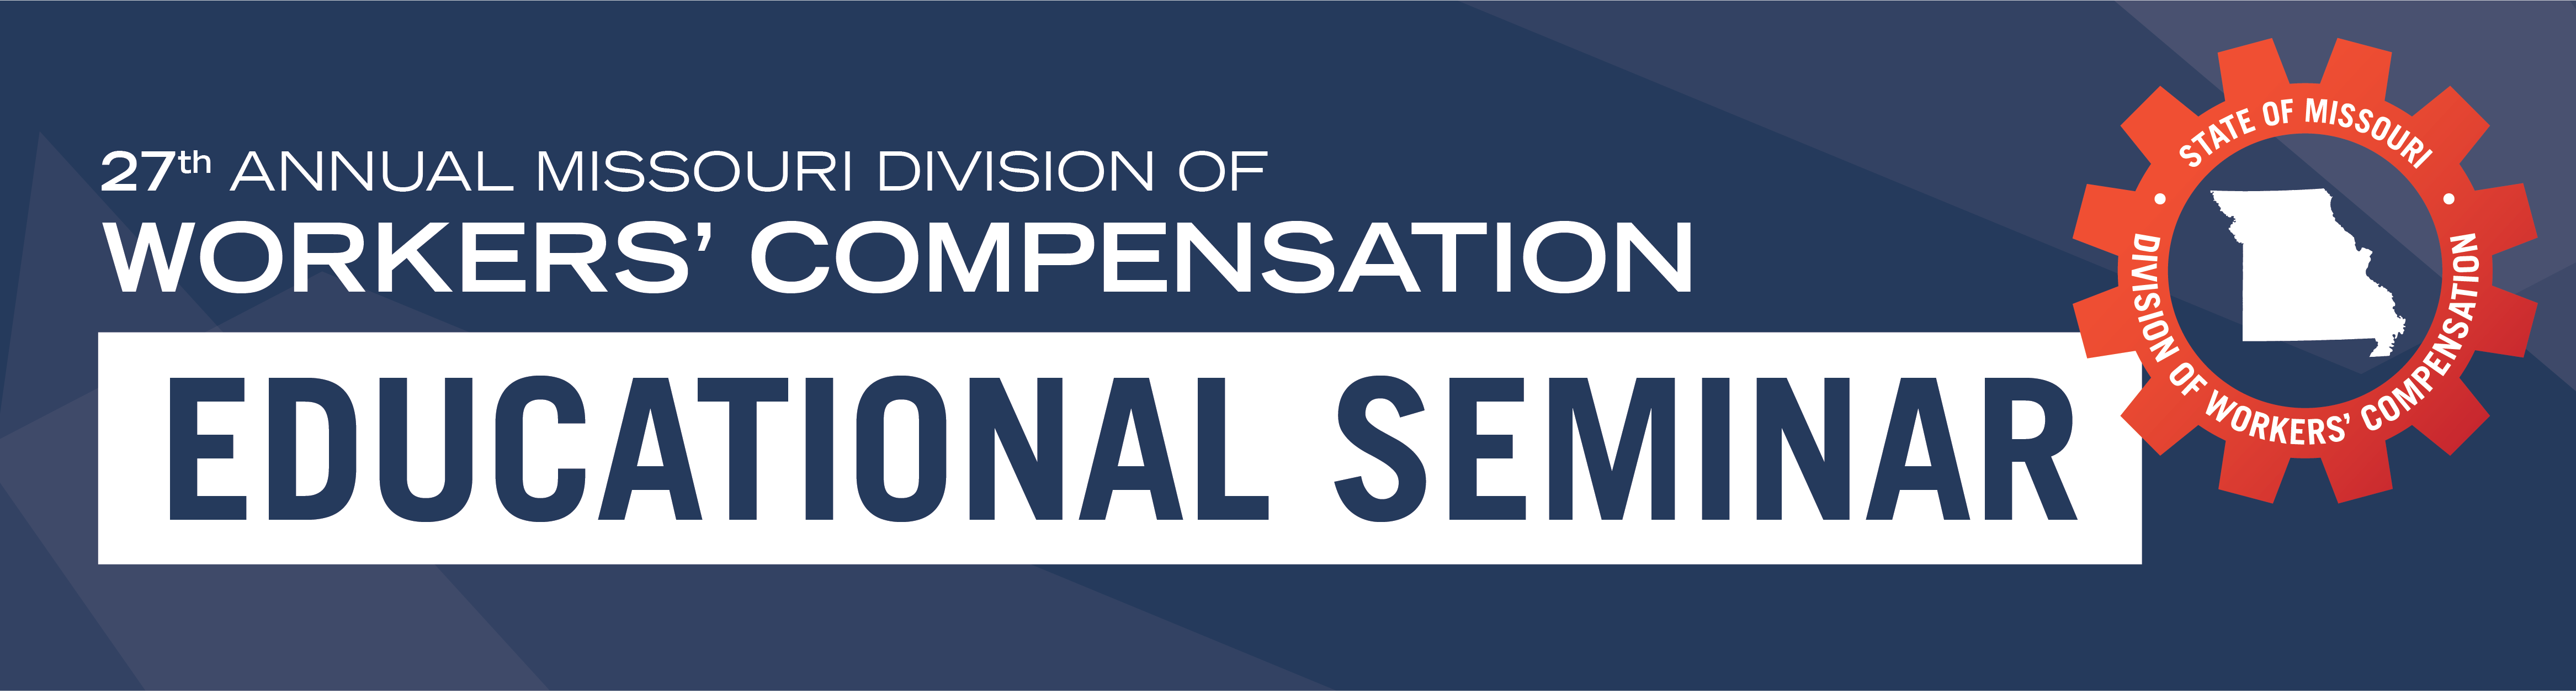 27th Annual Missouri Division of Workers' Compensation Educational Seminar